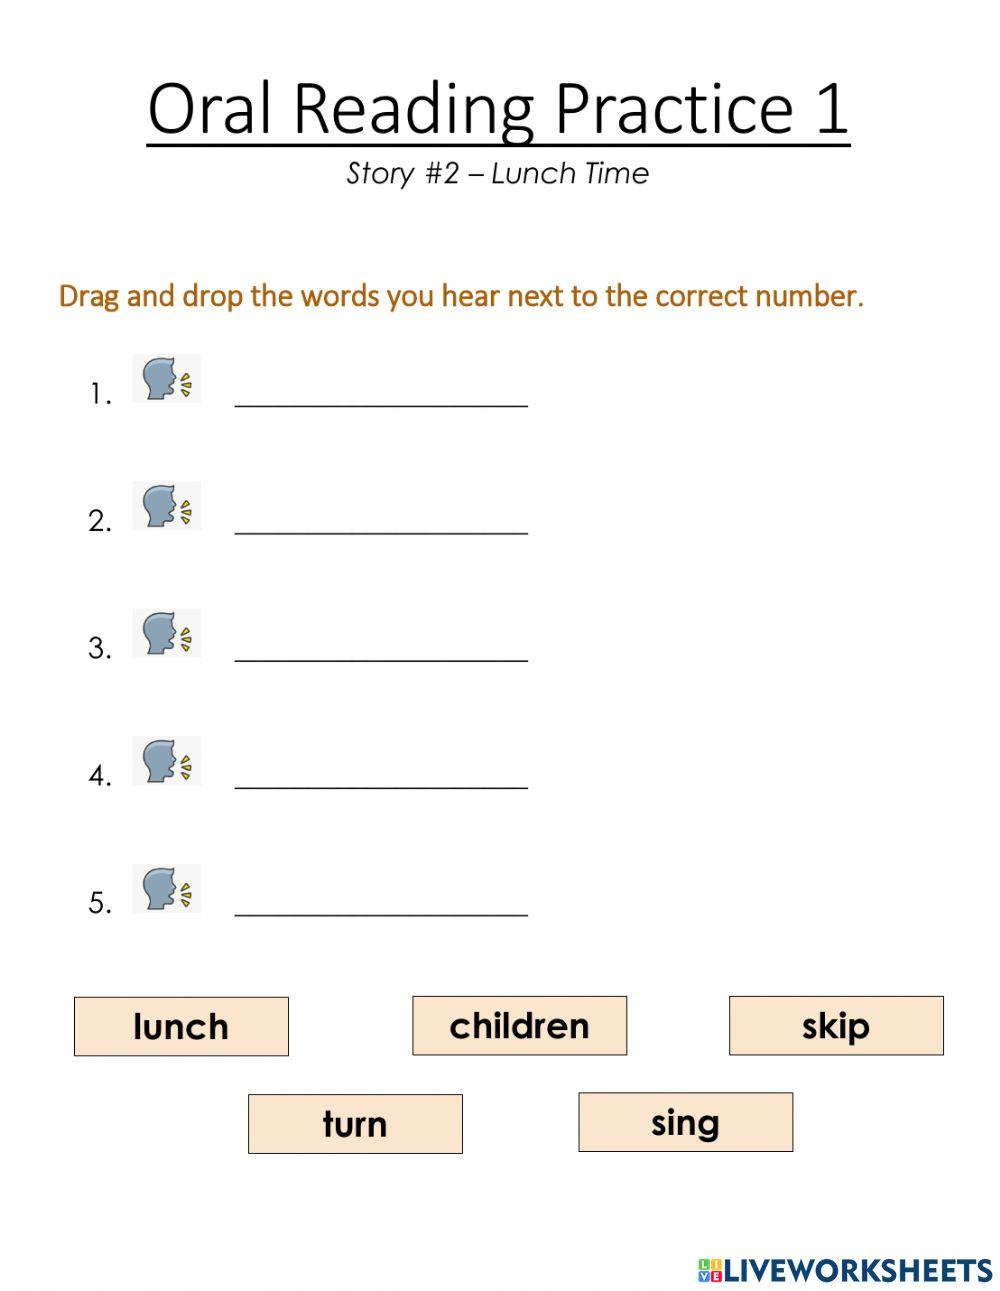 Oral Reading Practice 1 - Lunch Time